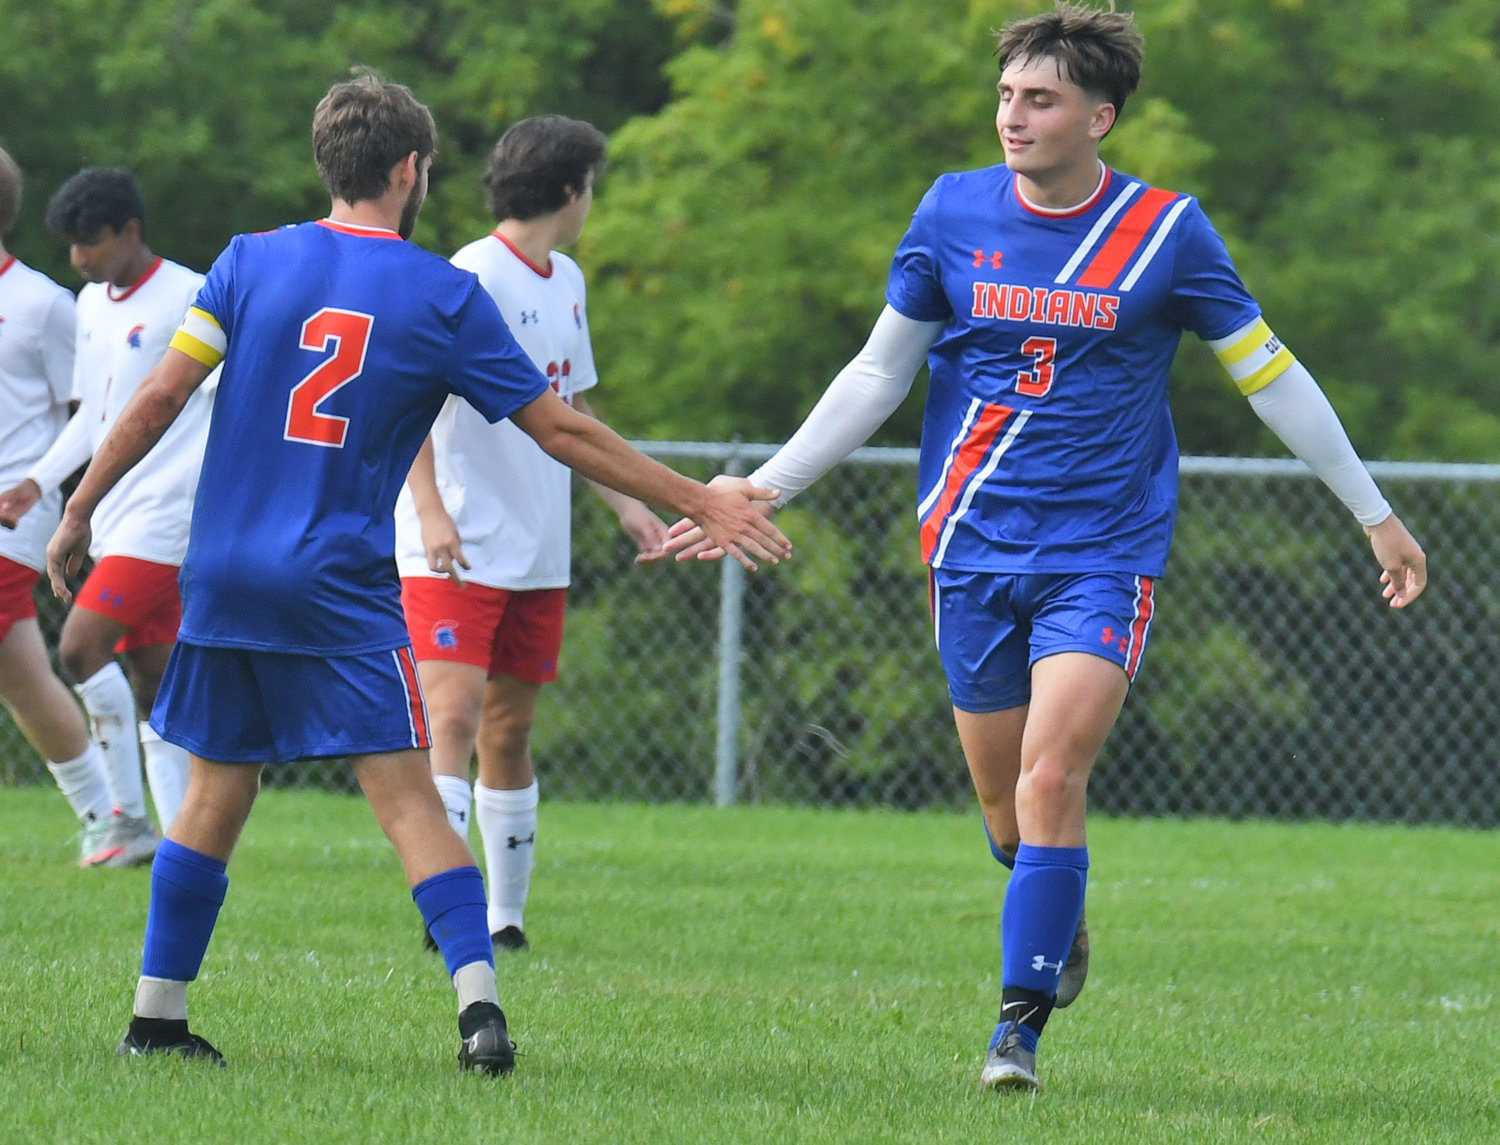 Oneida soccer players Andrew Hicks, right, and Ryan Hughes celebrate the first goal of the game scored by Hicks. New Hartford rallied with six unanswered goals to win 6-1 on the road Tuesday.